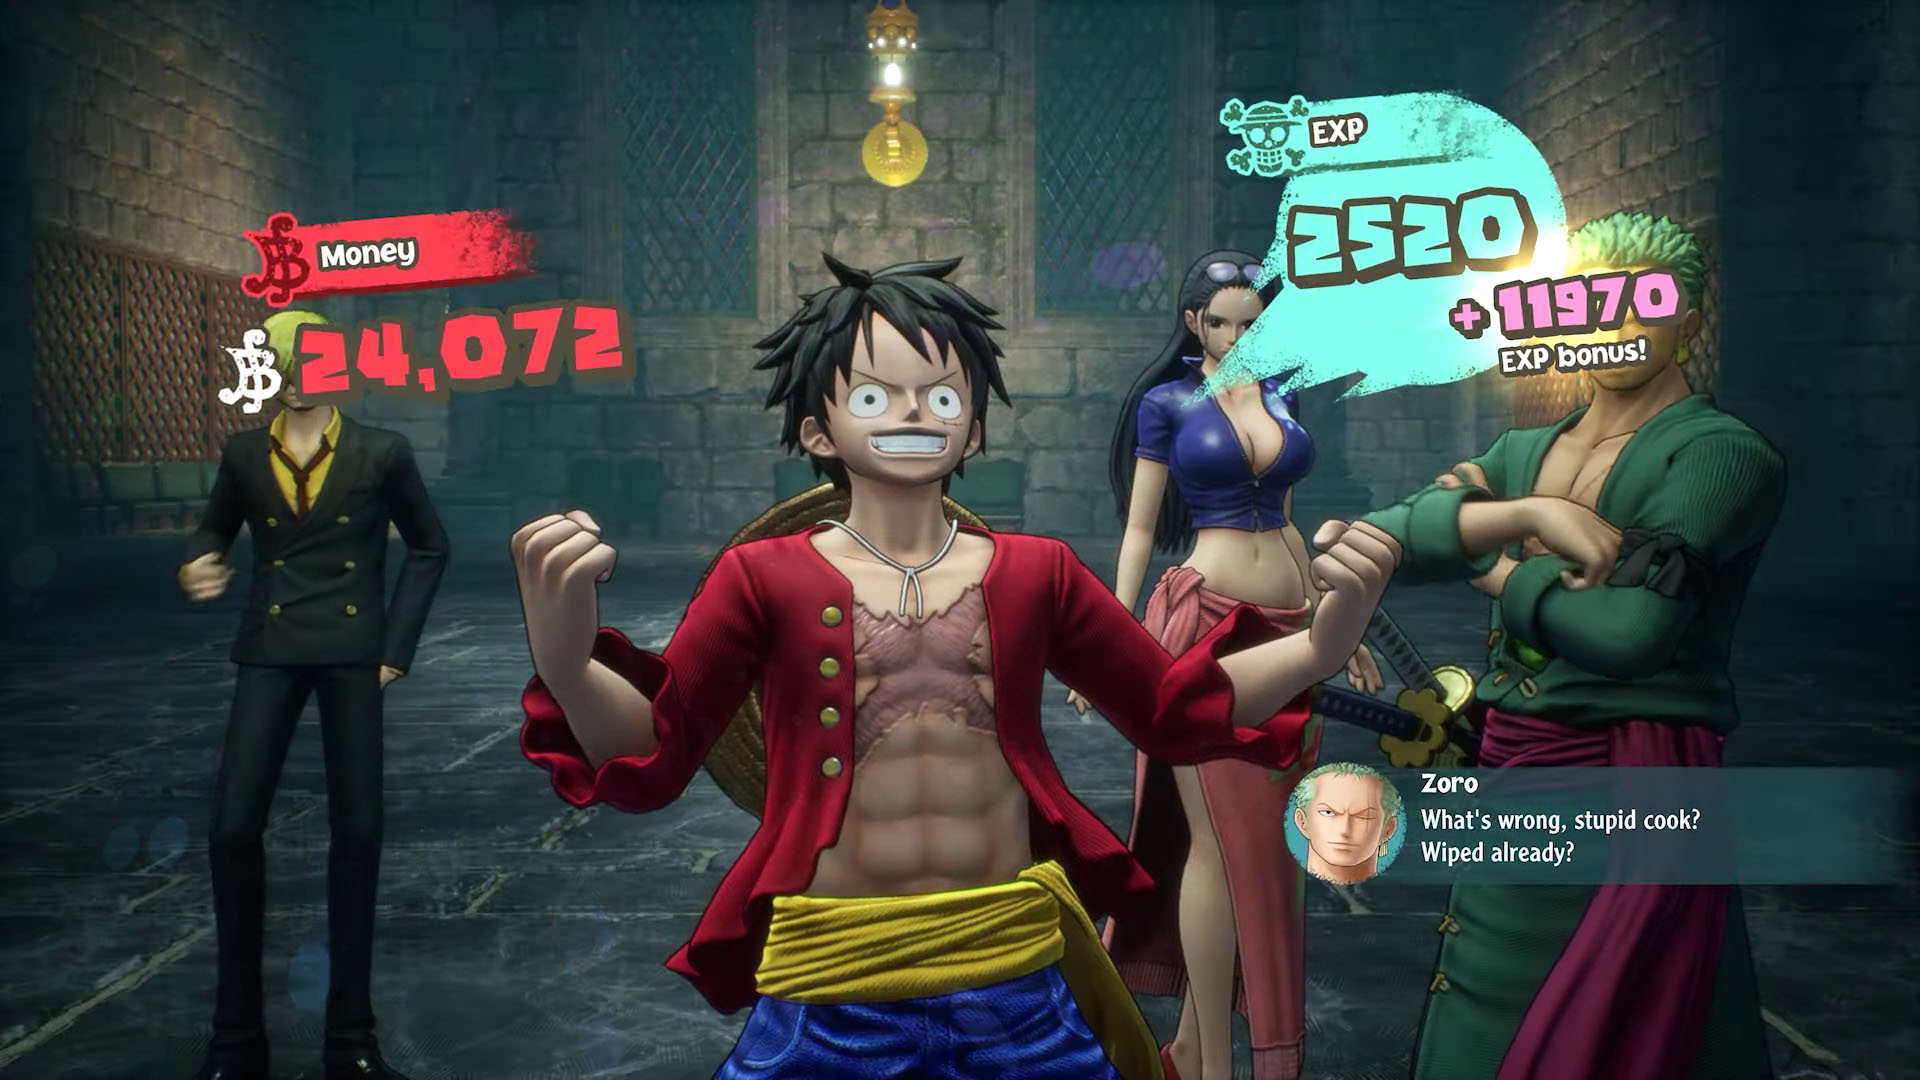 One Piece Odyssey Free Demo Now Available On Xbox